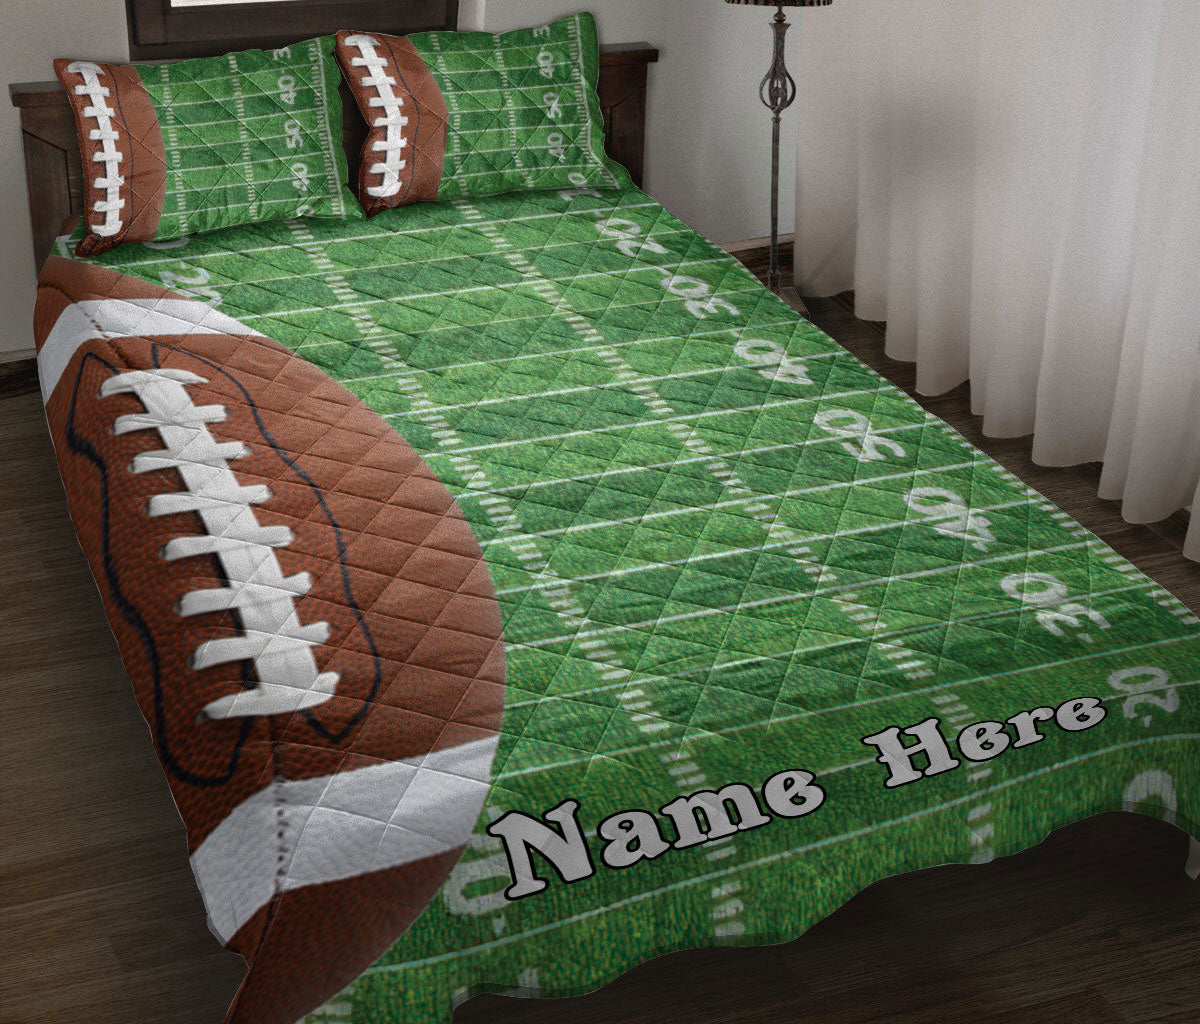 Ohaprints-Quilt-Bed-Set-Pillowcase-Football-Ball-Field-Unique-Gift-For-Sports-Lover-Custom-Personalized-Name-Blanket-Bedspread-Bedding-9-Throw (55'' x 60'')